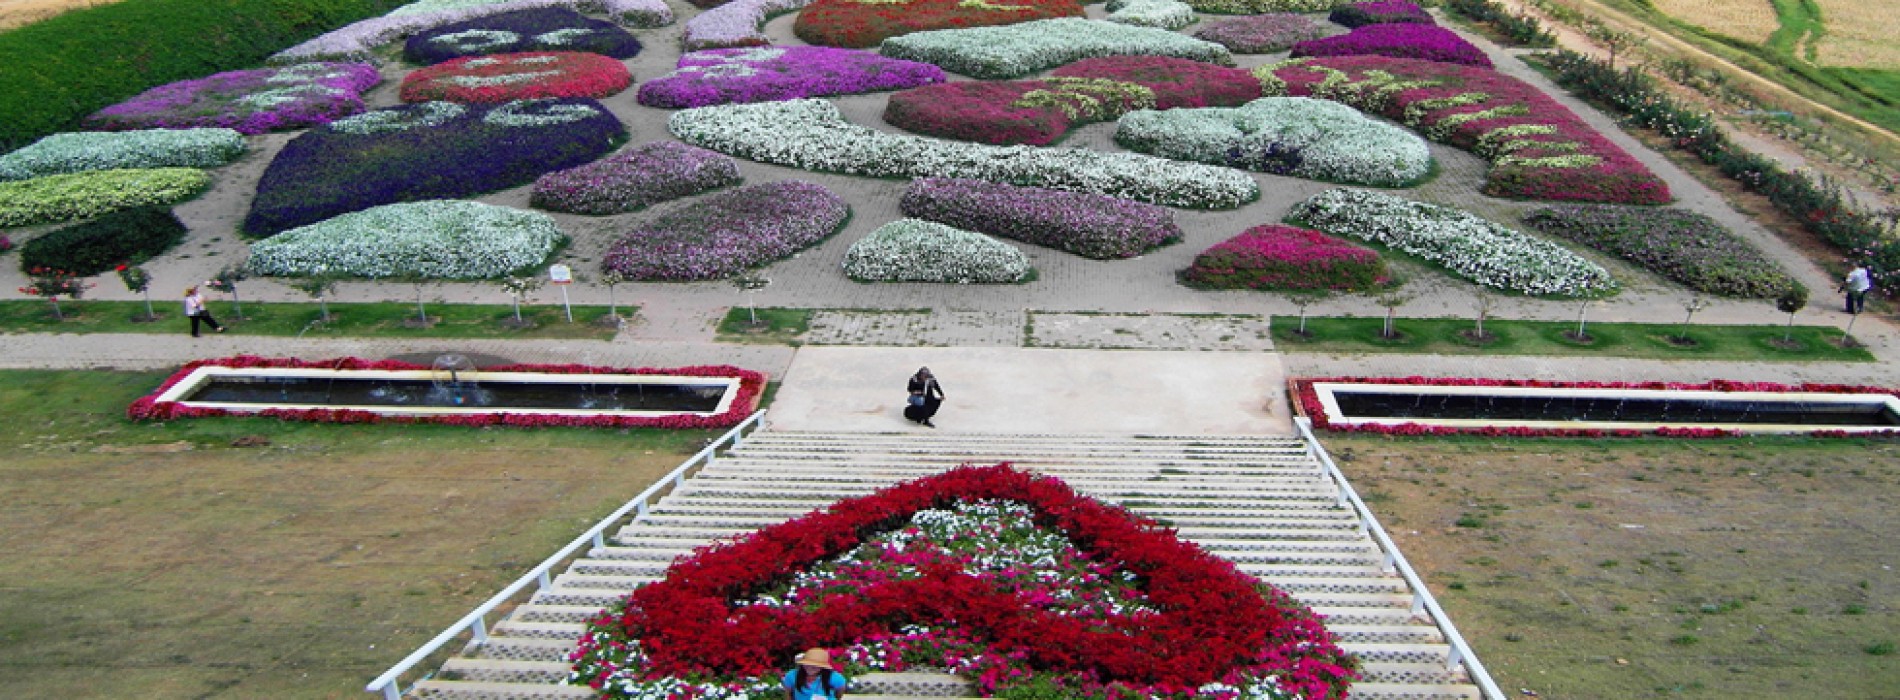 Thailand’s Flora Park Festival welcomes visitors with flower displays and floral spectacles